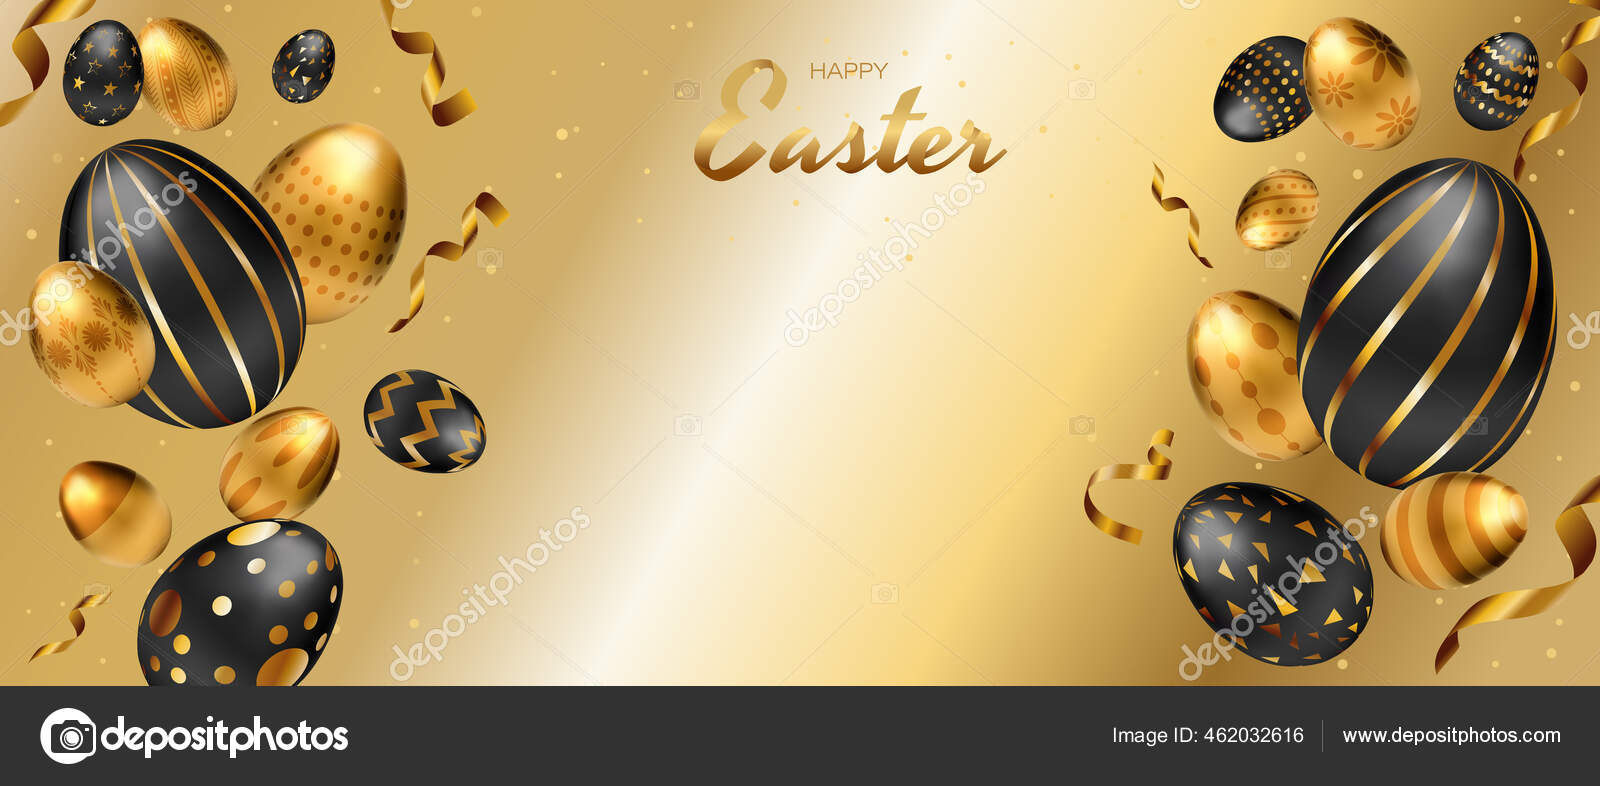 Easter Background Gold Black Eggs Patterns Black Eggs Gold Pattern Stock Vector Image By C Inataliia